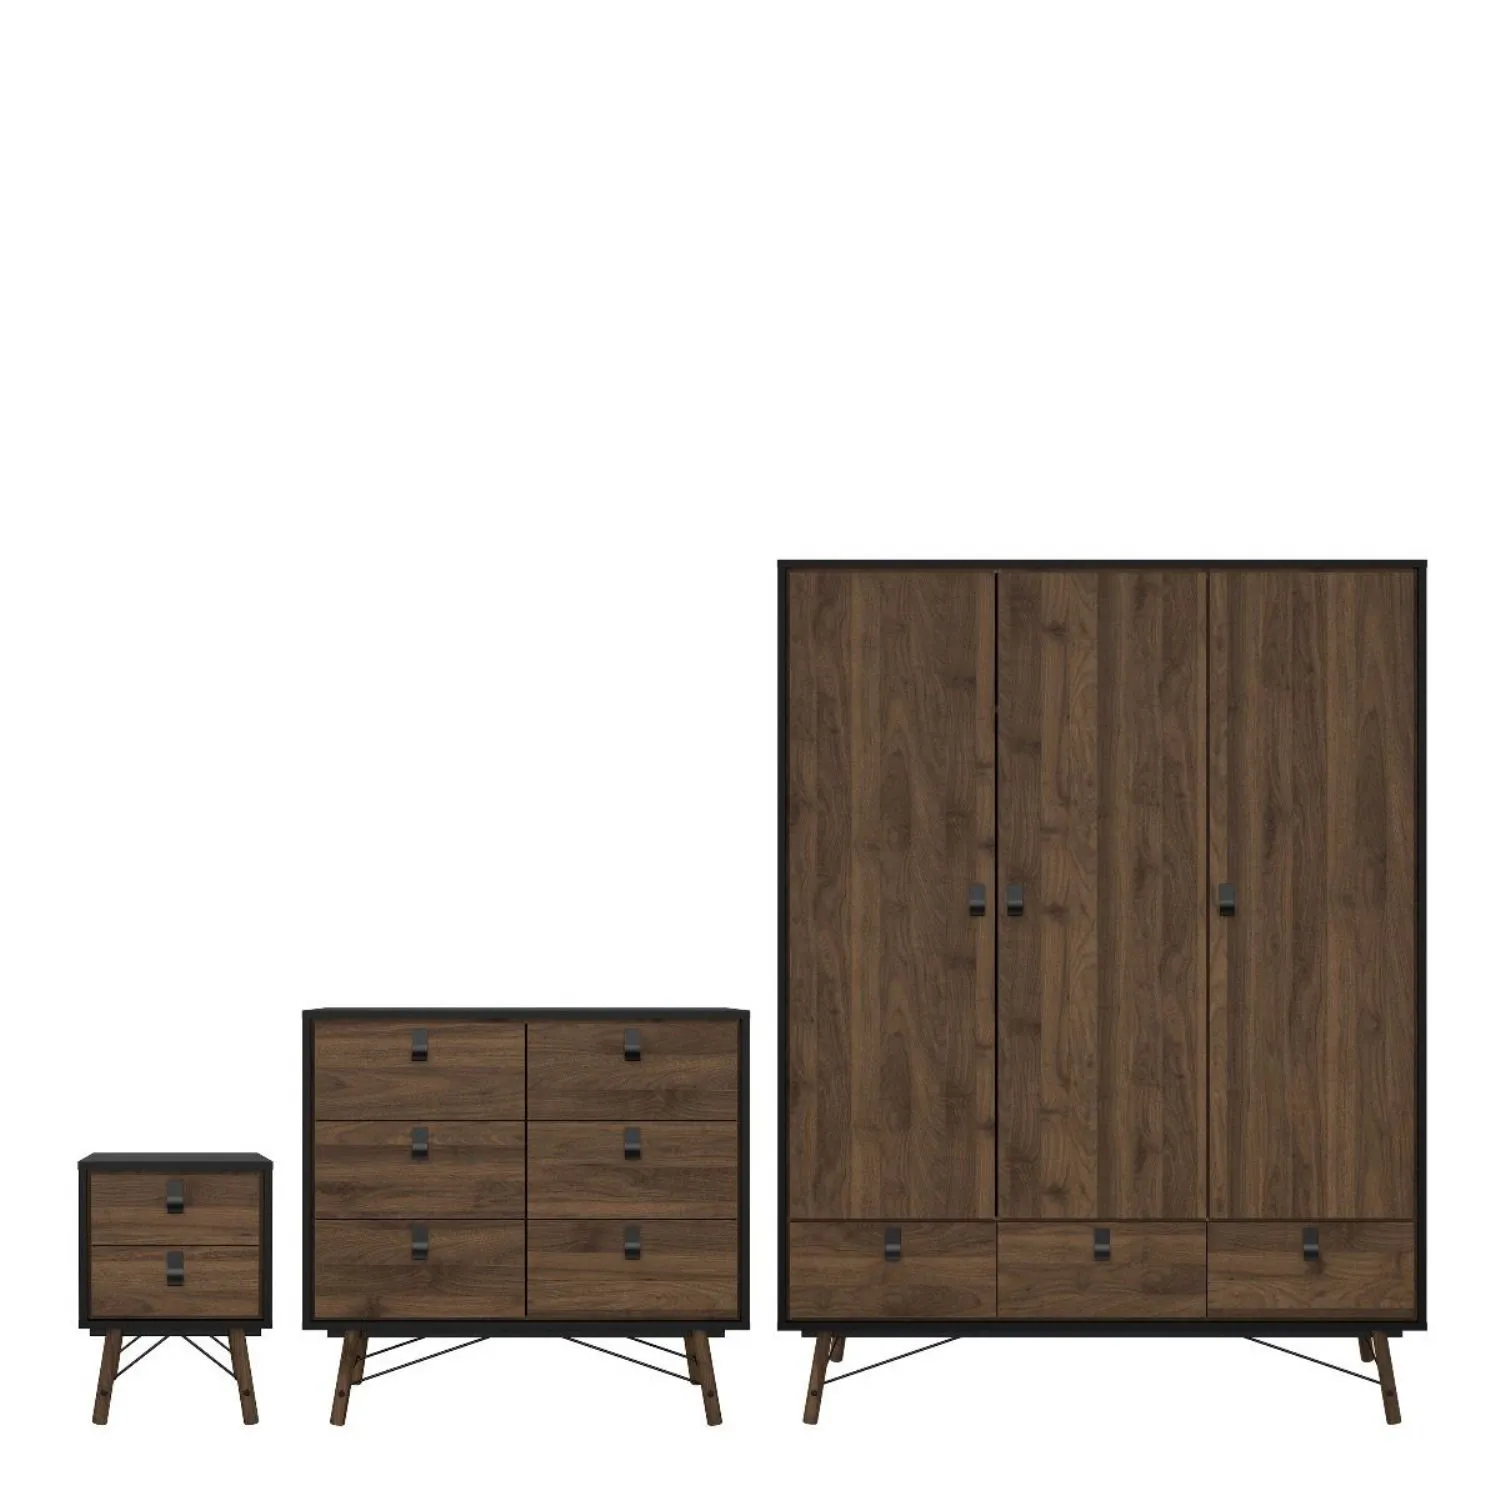 Ry Package Wardrobe 3 doors + 3 drawers + Double chest of drawers 6 drawers + Bedside cabinet 2 drawer in Matt Black Walnut